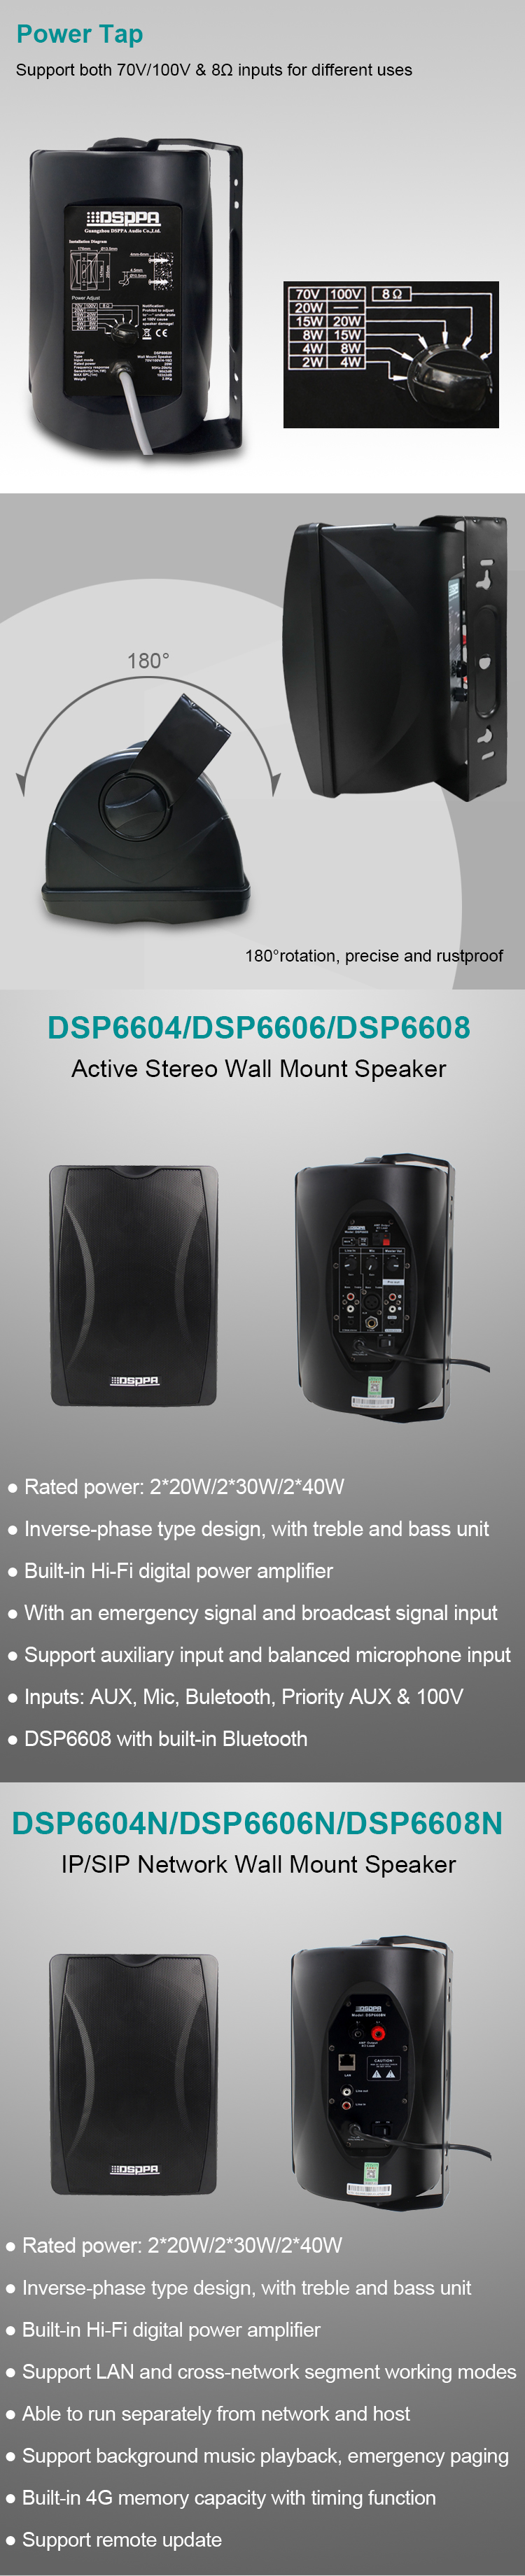 DSP8064B 40W Wall Mount Speaker with Power Tap